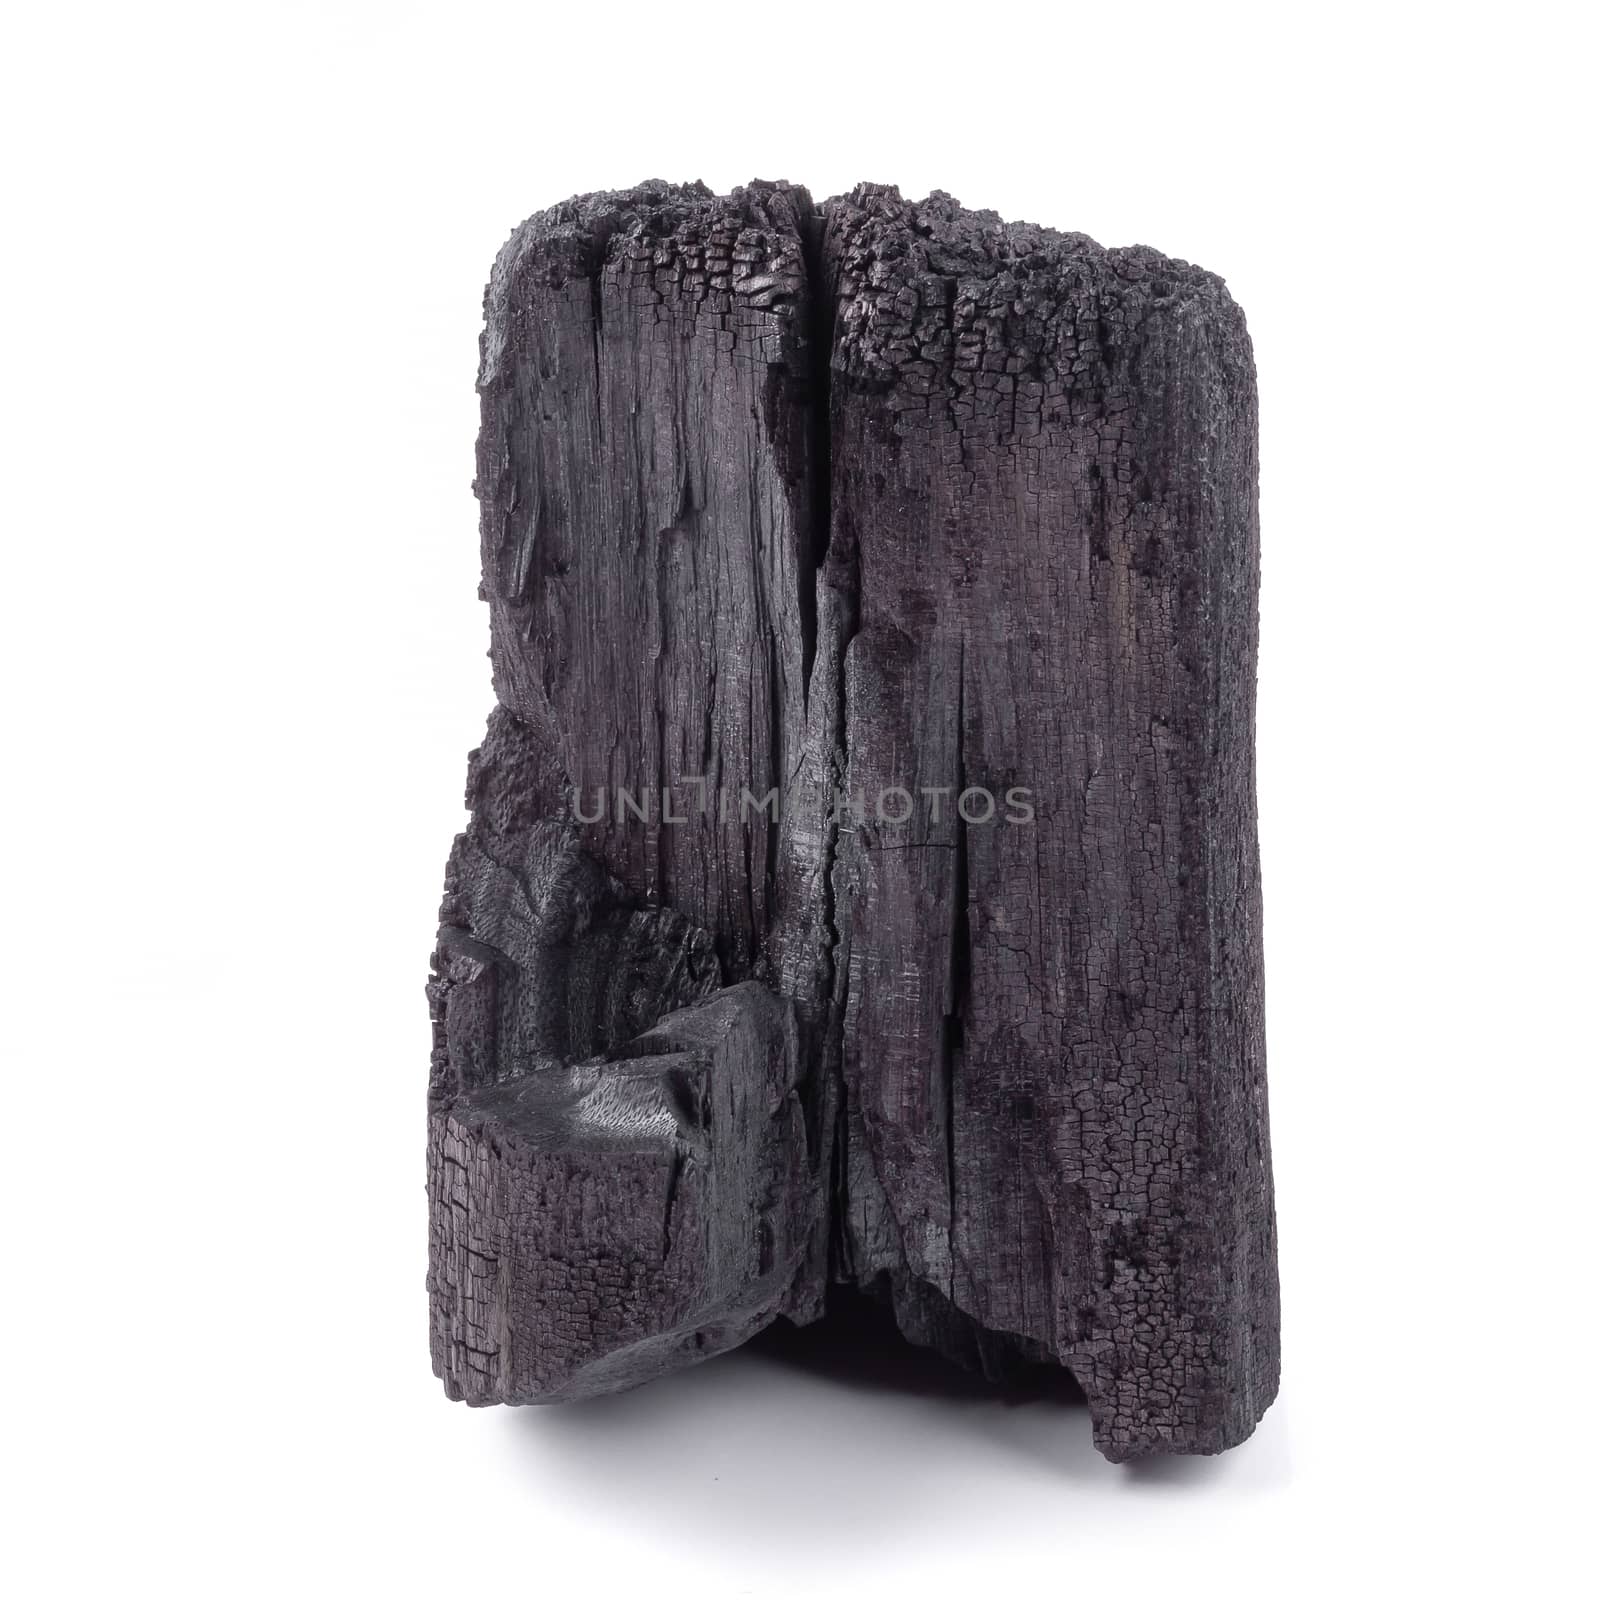 Natural wood charcoal Isolated on white background.